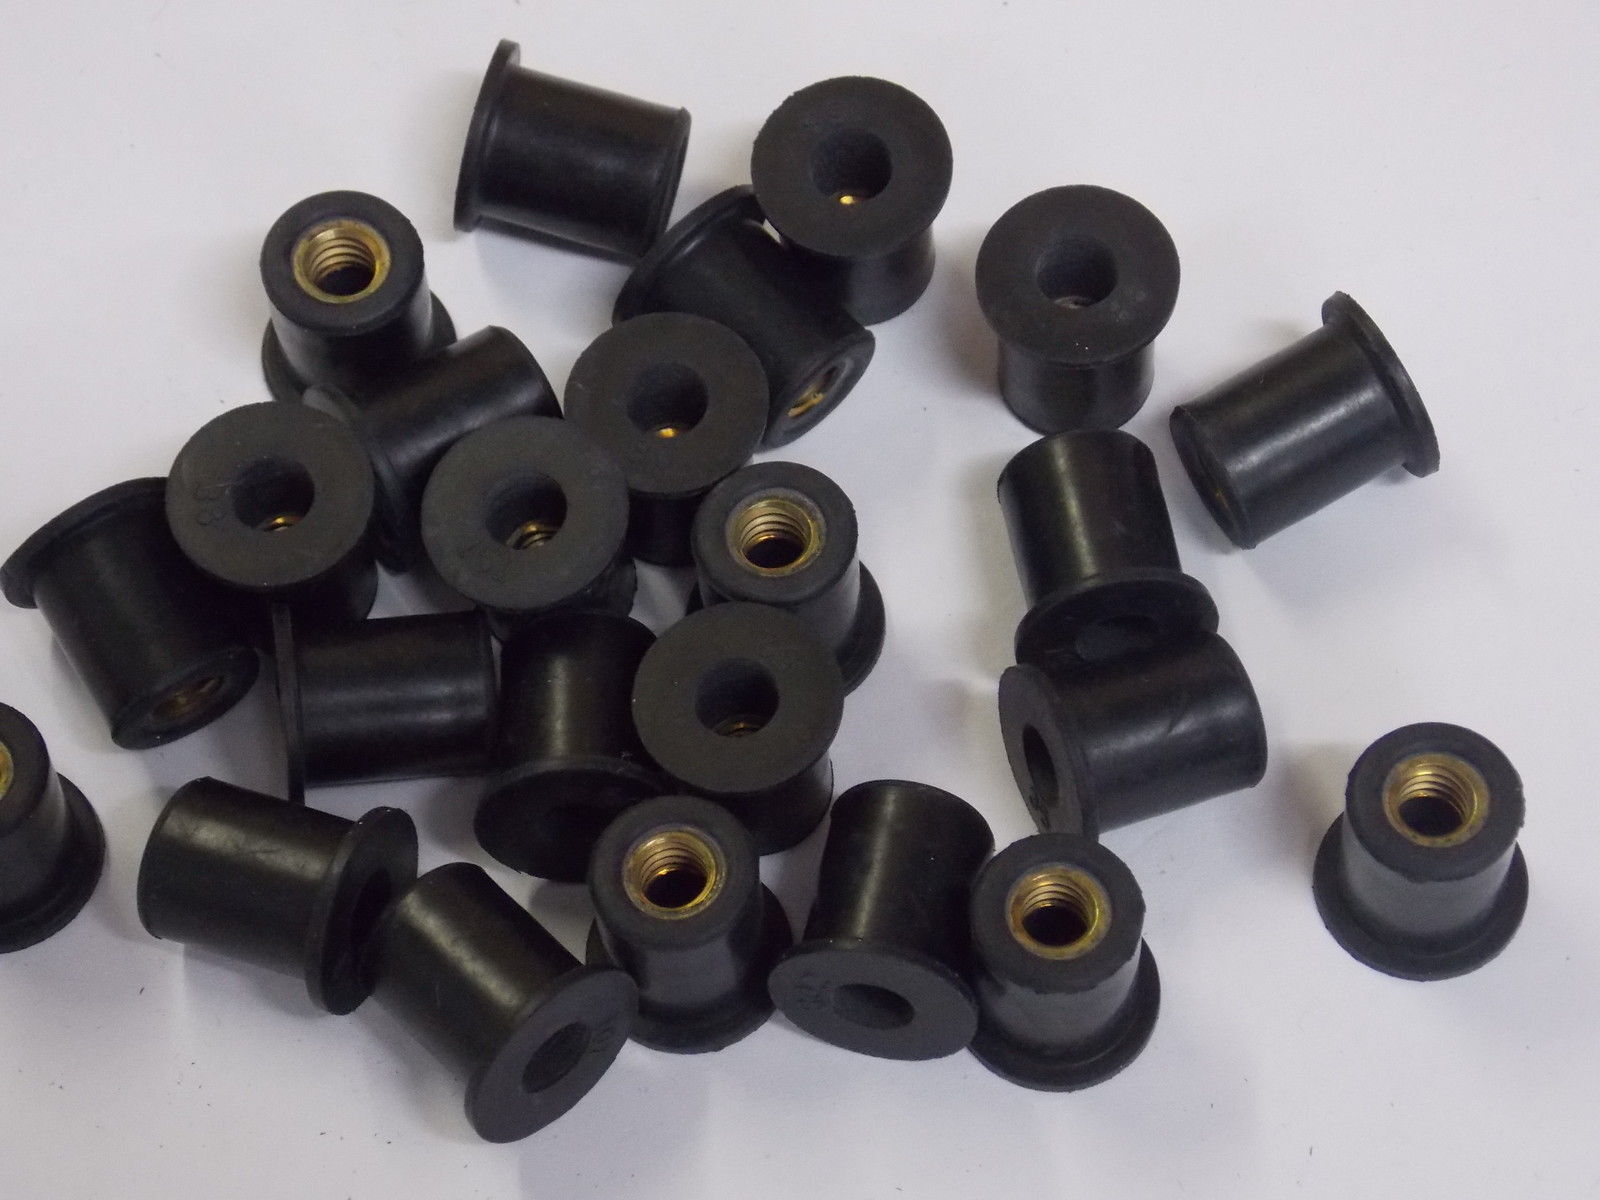 25 1/4” - 20 RUBBER WELL NUTS FOR 1/2” HOLE GM 528846 NEW *FREE SHIP*